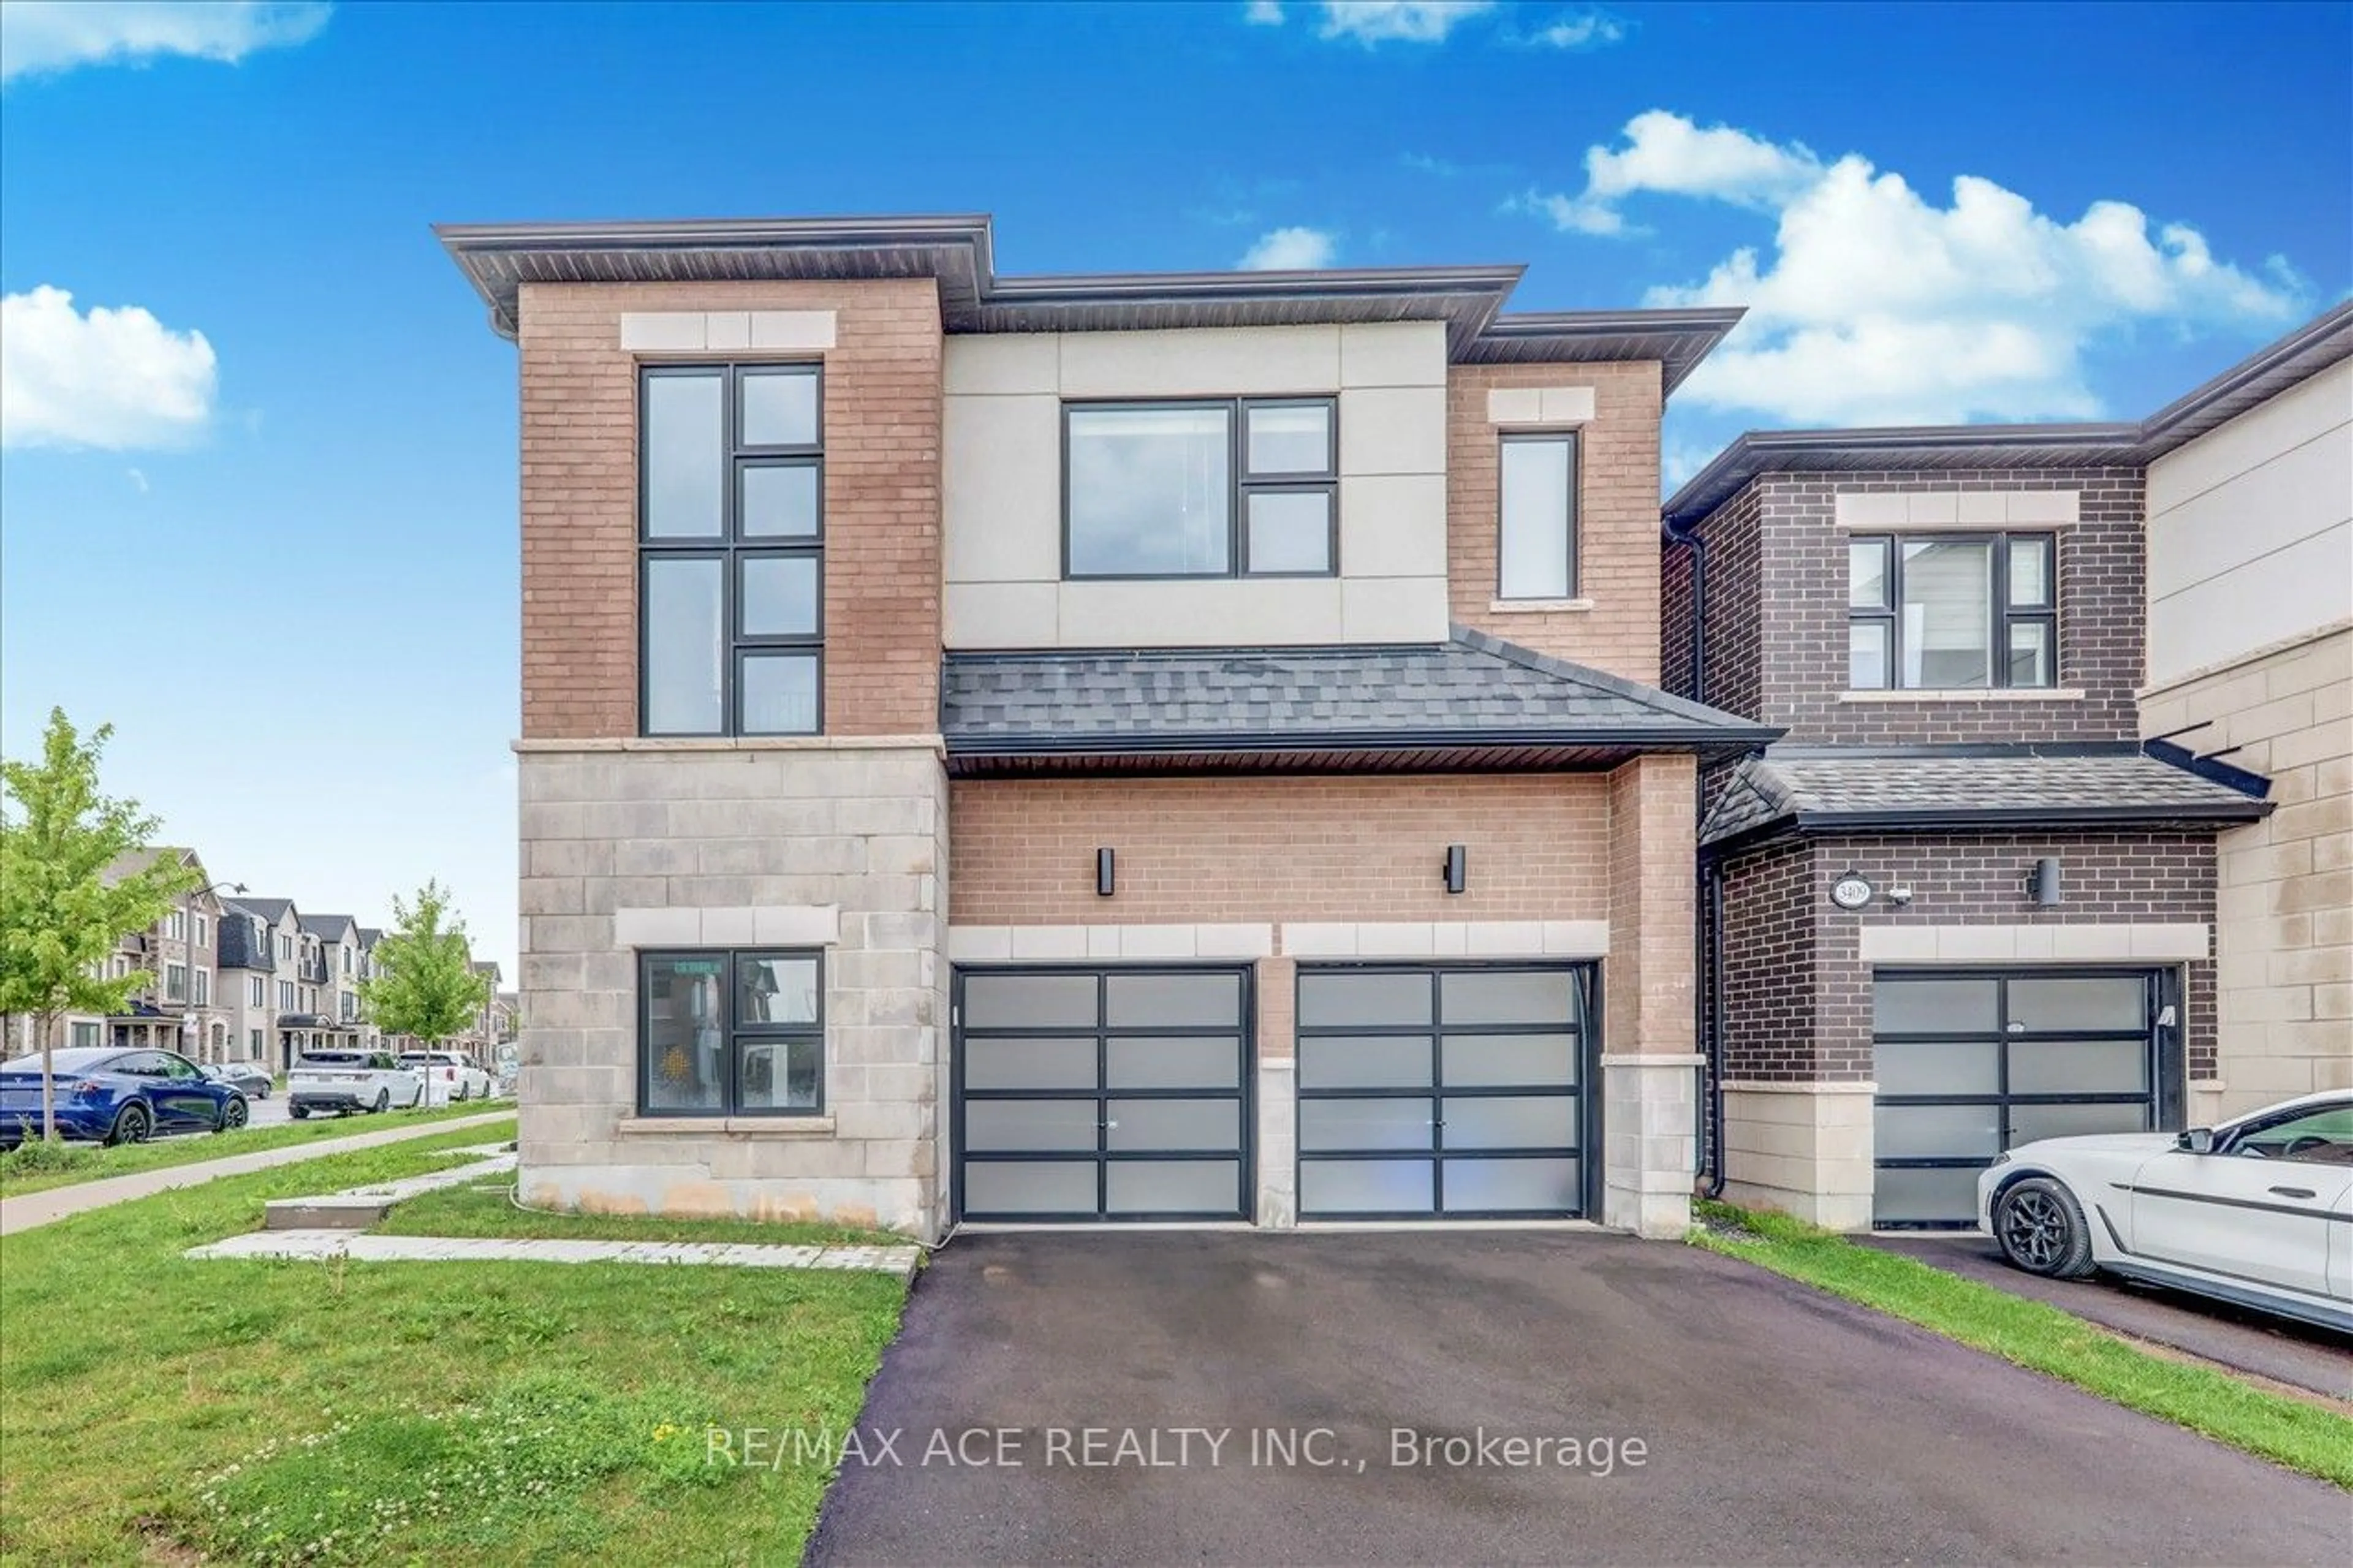 Home with brick exterior material for 142 Settlers Rd, Oakville Ontario L6H 7C8